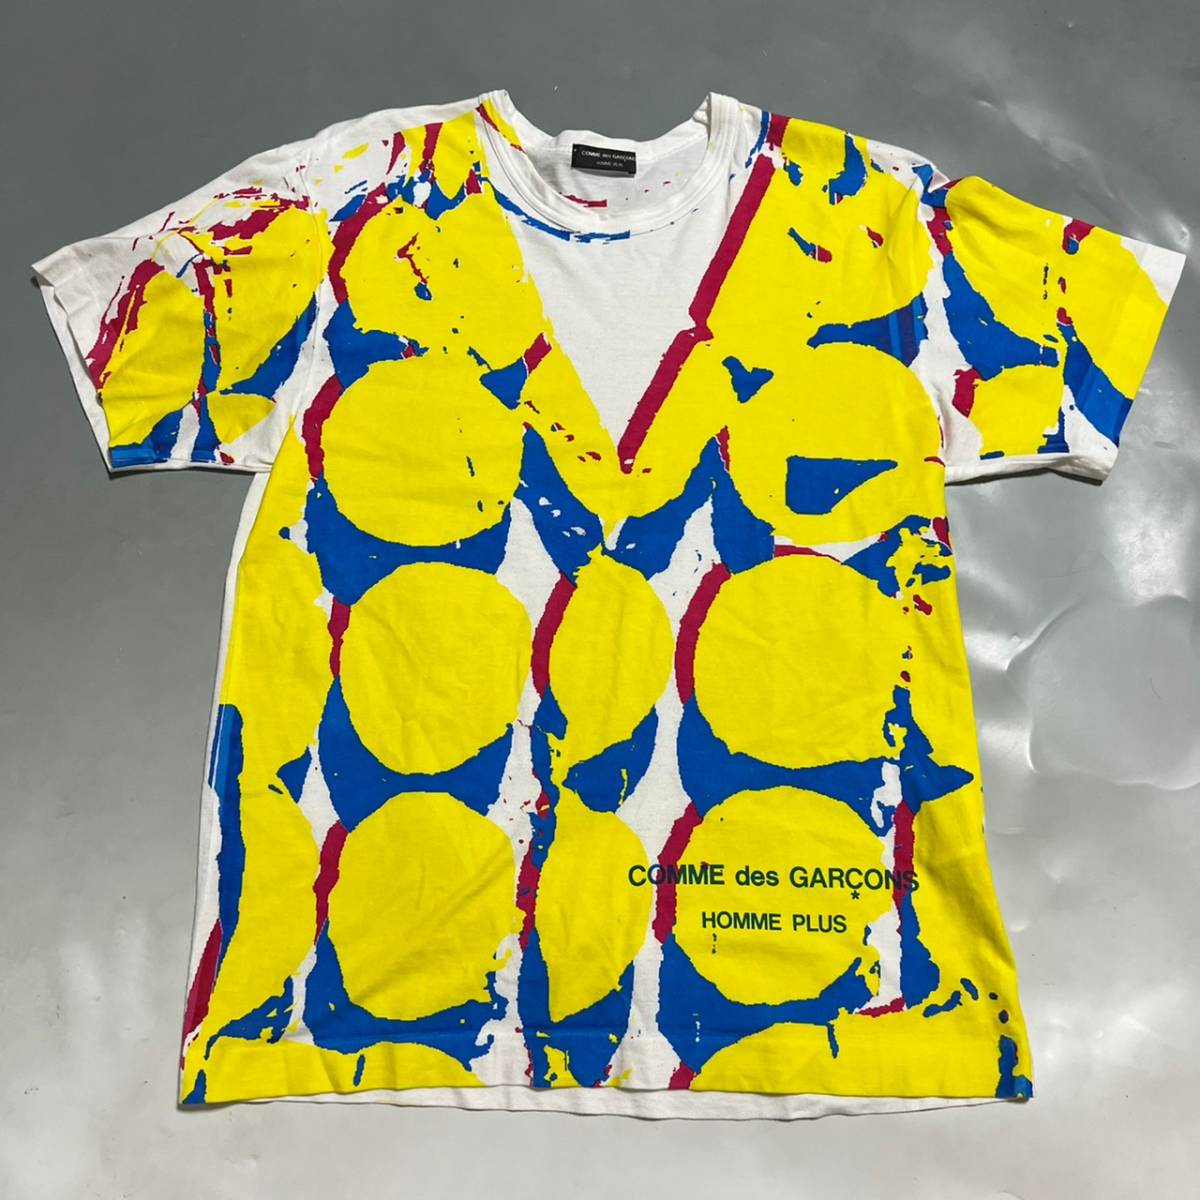 AD2001 COMME des GARCONS HOMME PLUS ギャルソン オム プリュス Tシャツ 白/イエロー ワンサイズ